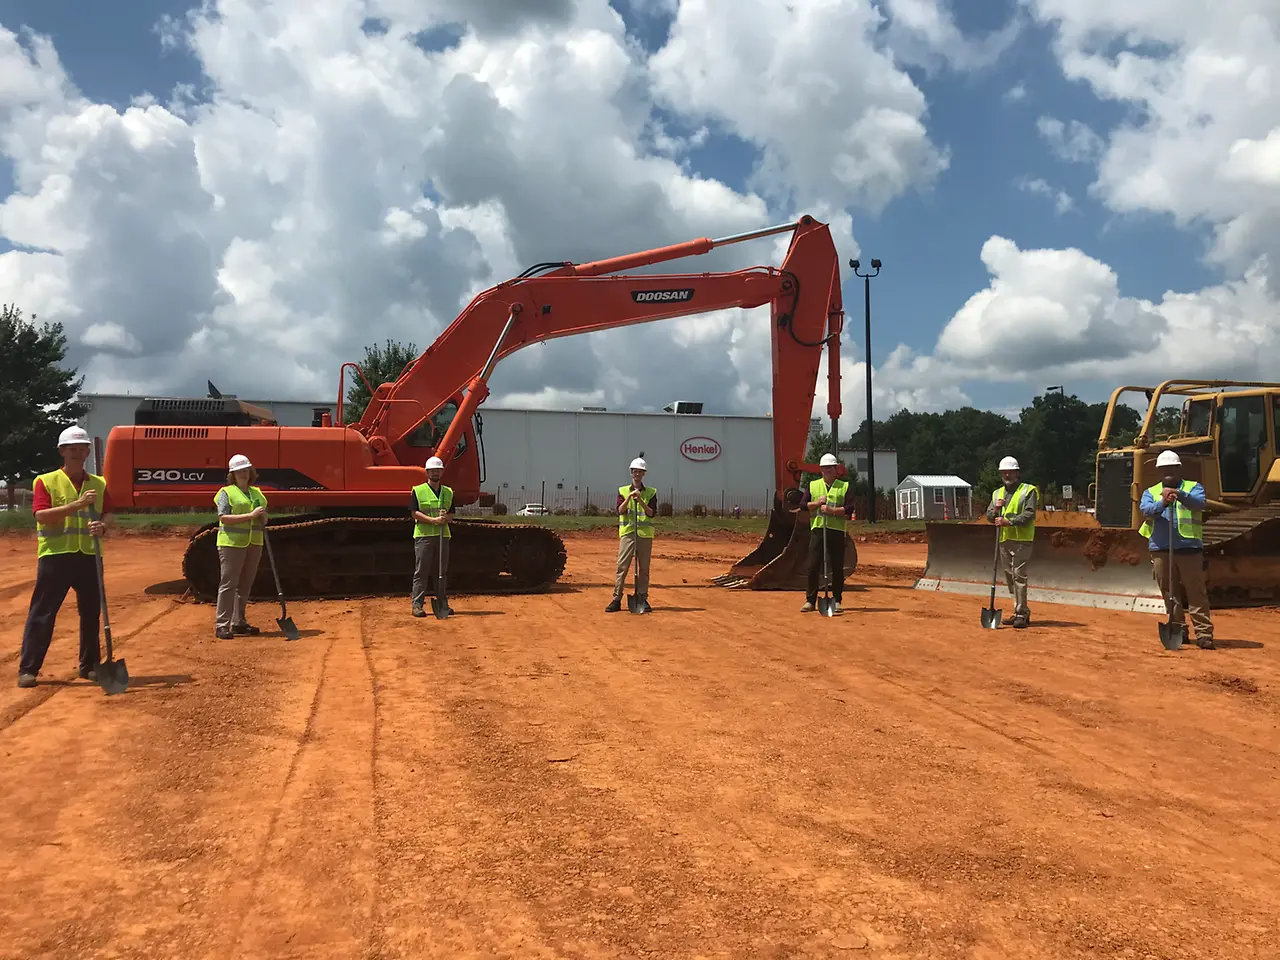 Adhesive Technologies has started construction for a new, state-of-the-art production area for UV-curable acrylic pressure sensitive adhesives at its site in Salisbury, North Carolina.